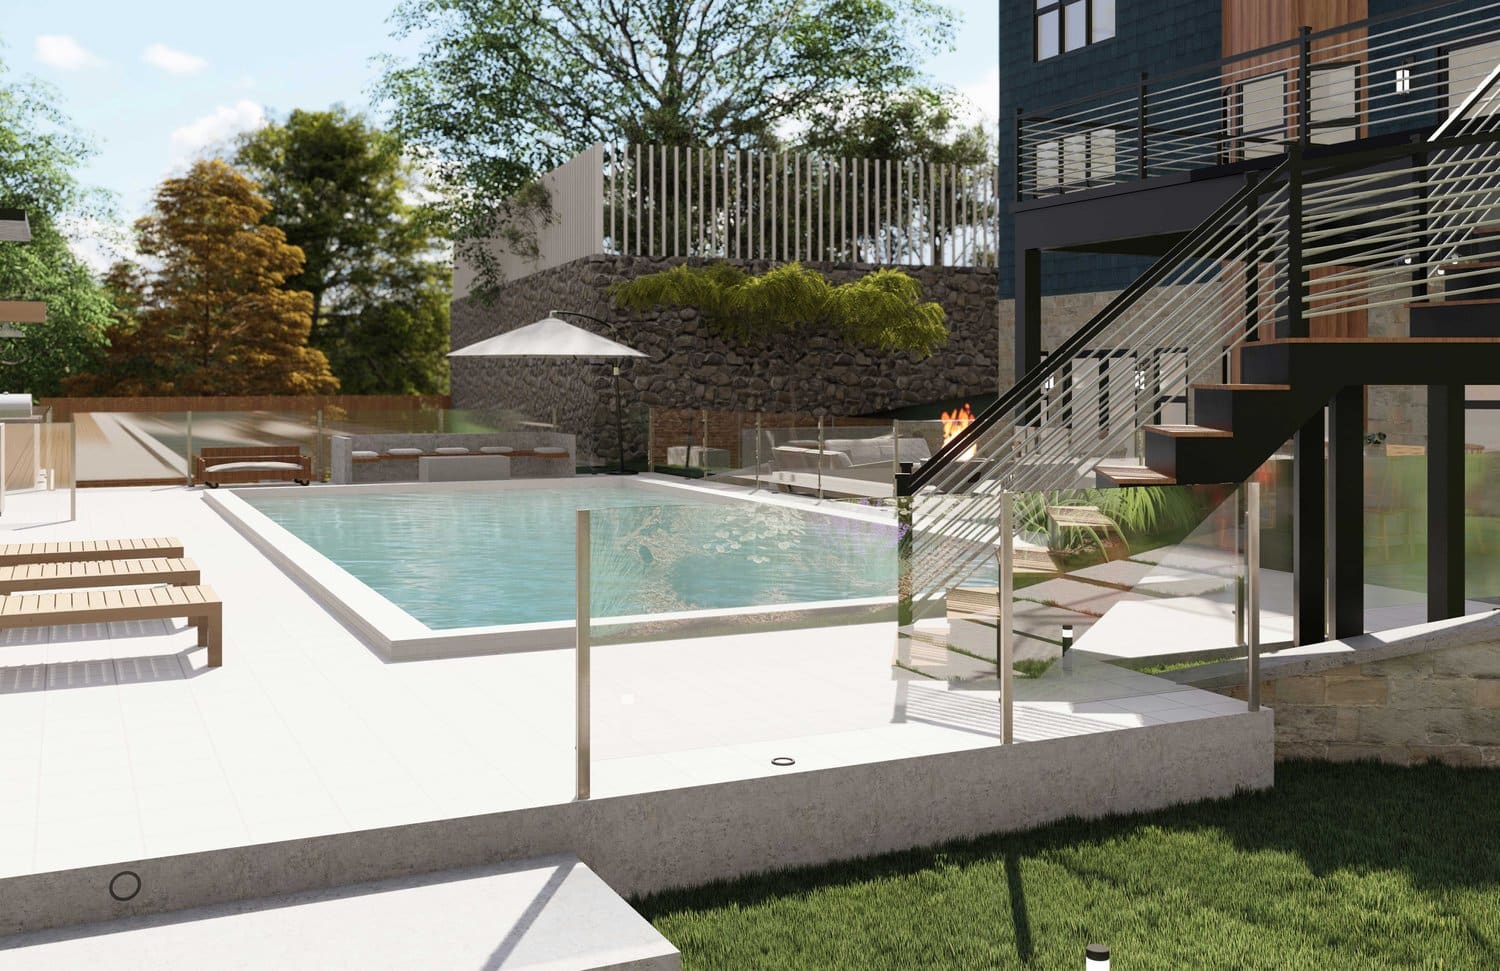 New Canaan pool design with concrete deck